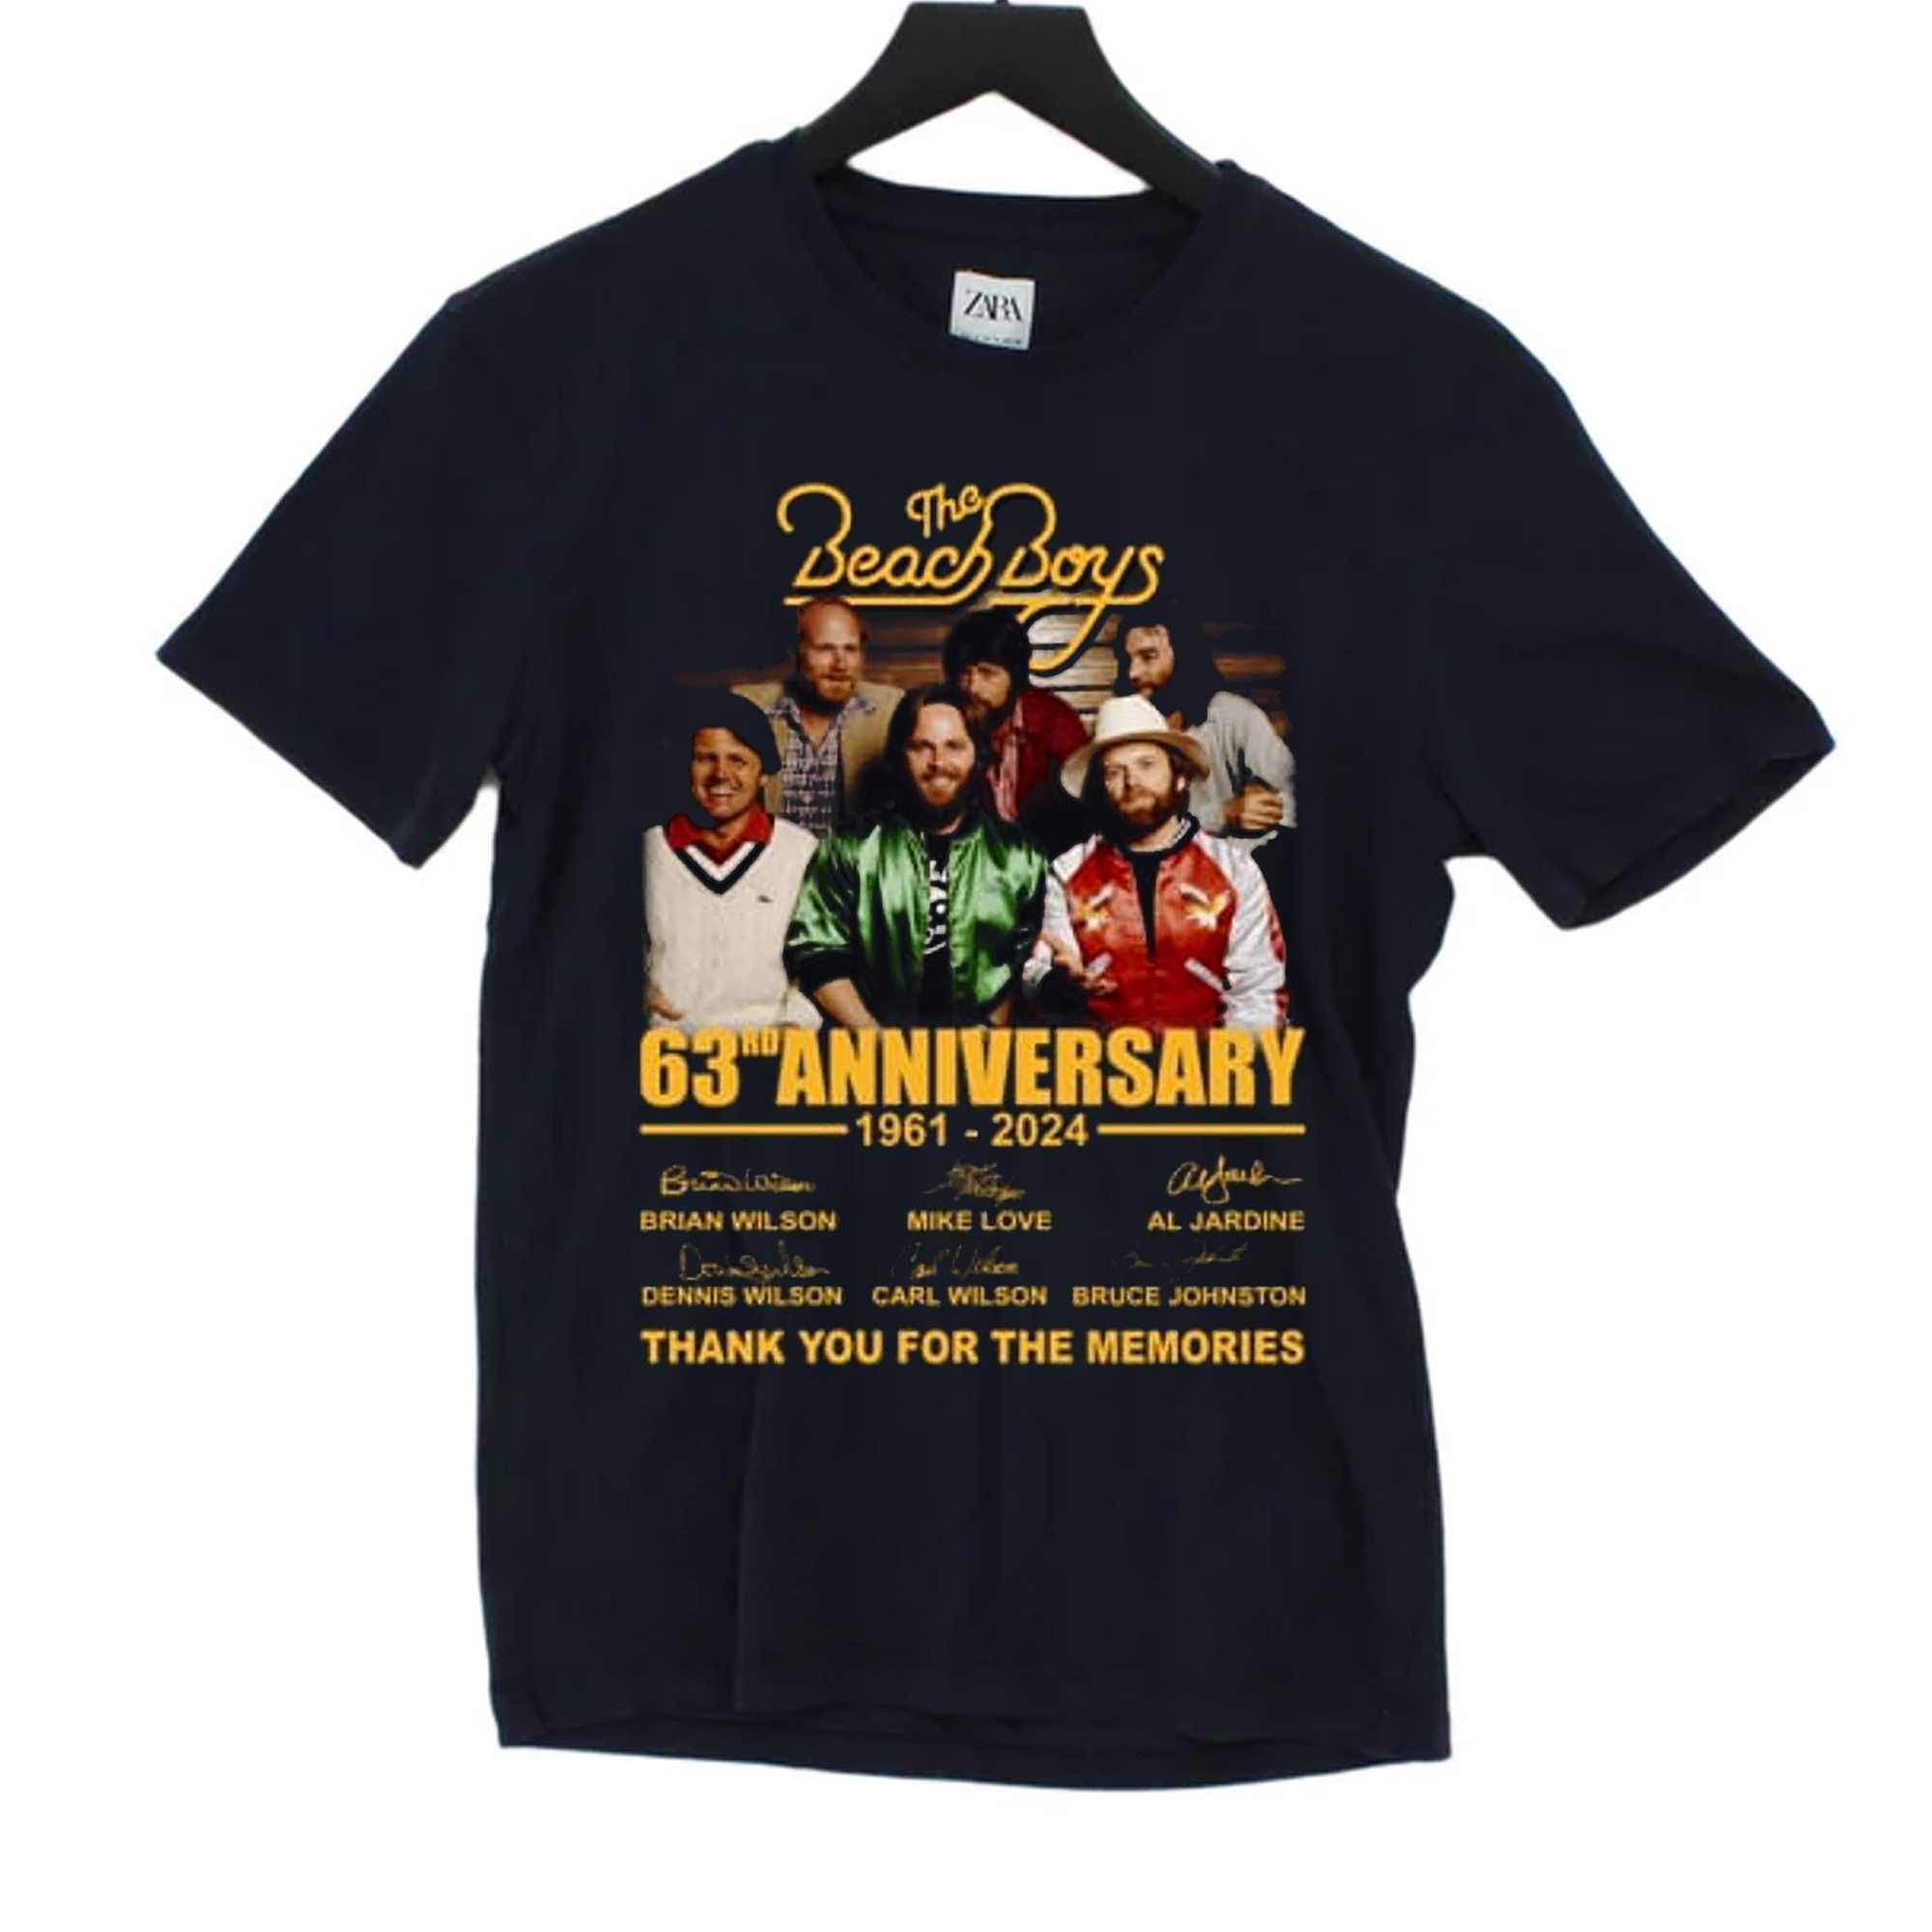 The Beach Boys 63rd Anniversary 1961-2024 Thank You For The Memories T-shirt 